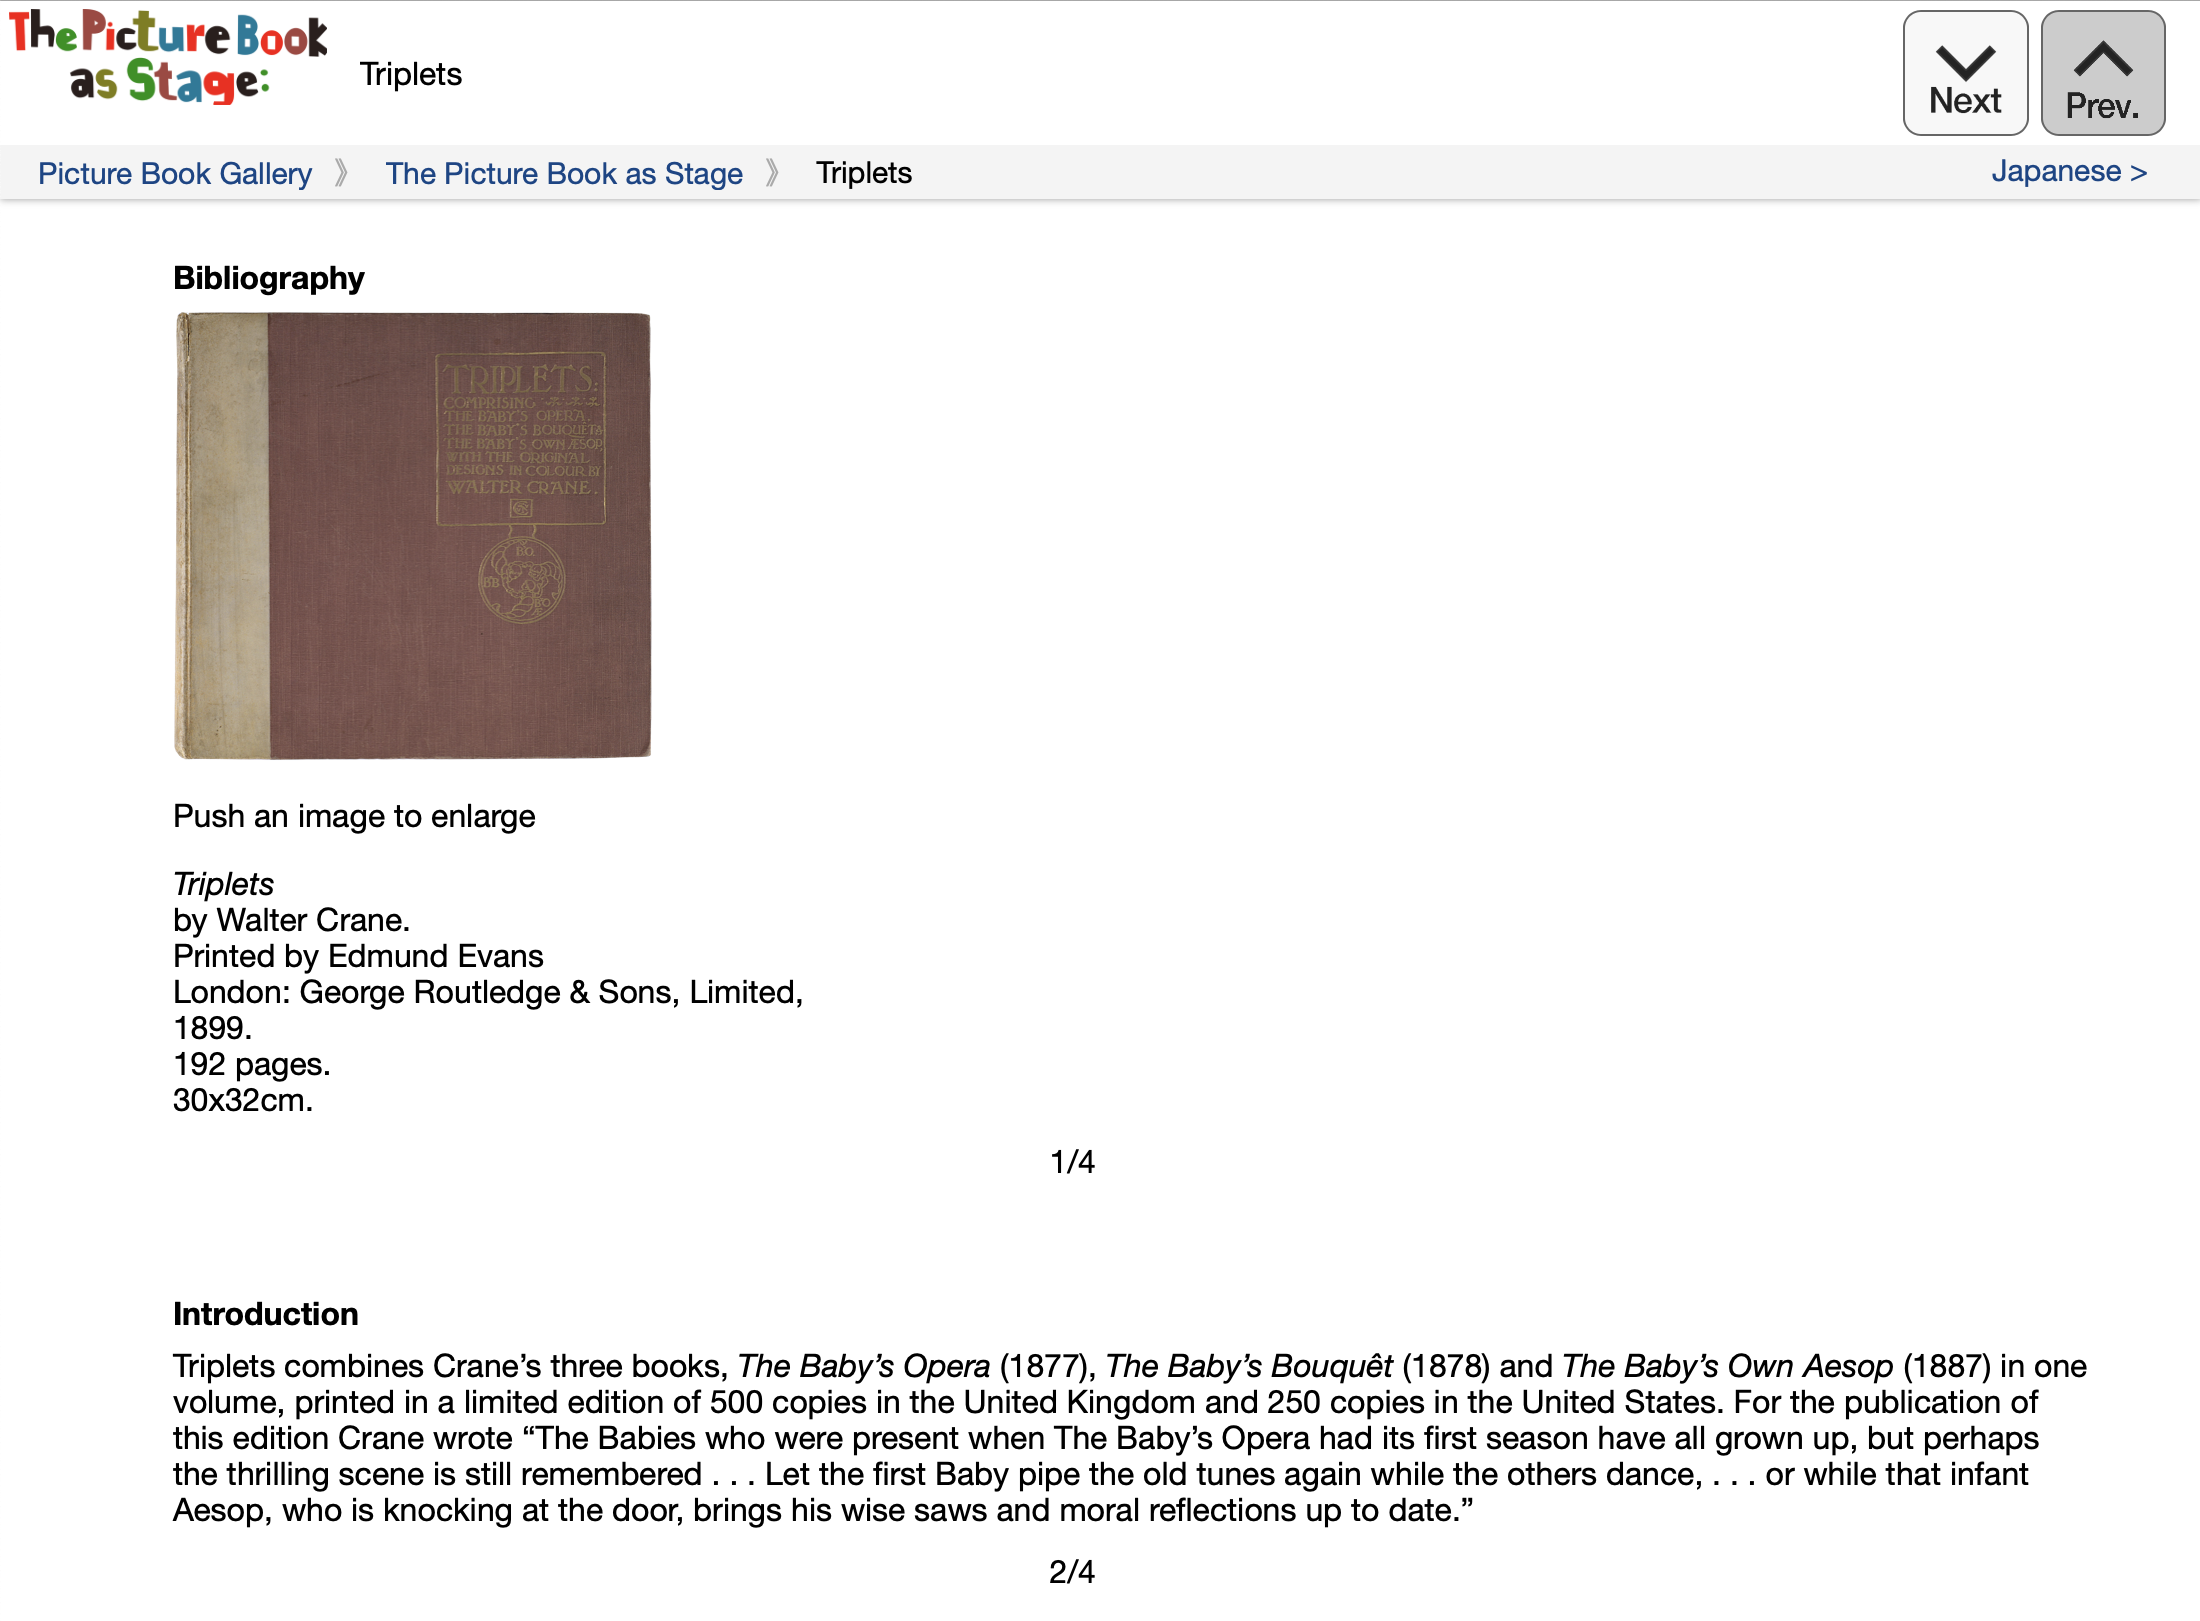 Image showing the buttons and links in the header of pages with only front cover images and bibliographic information